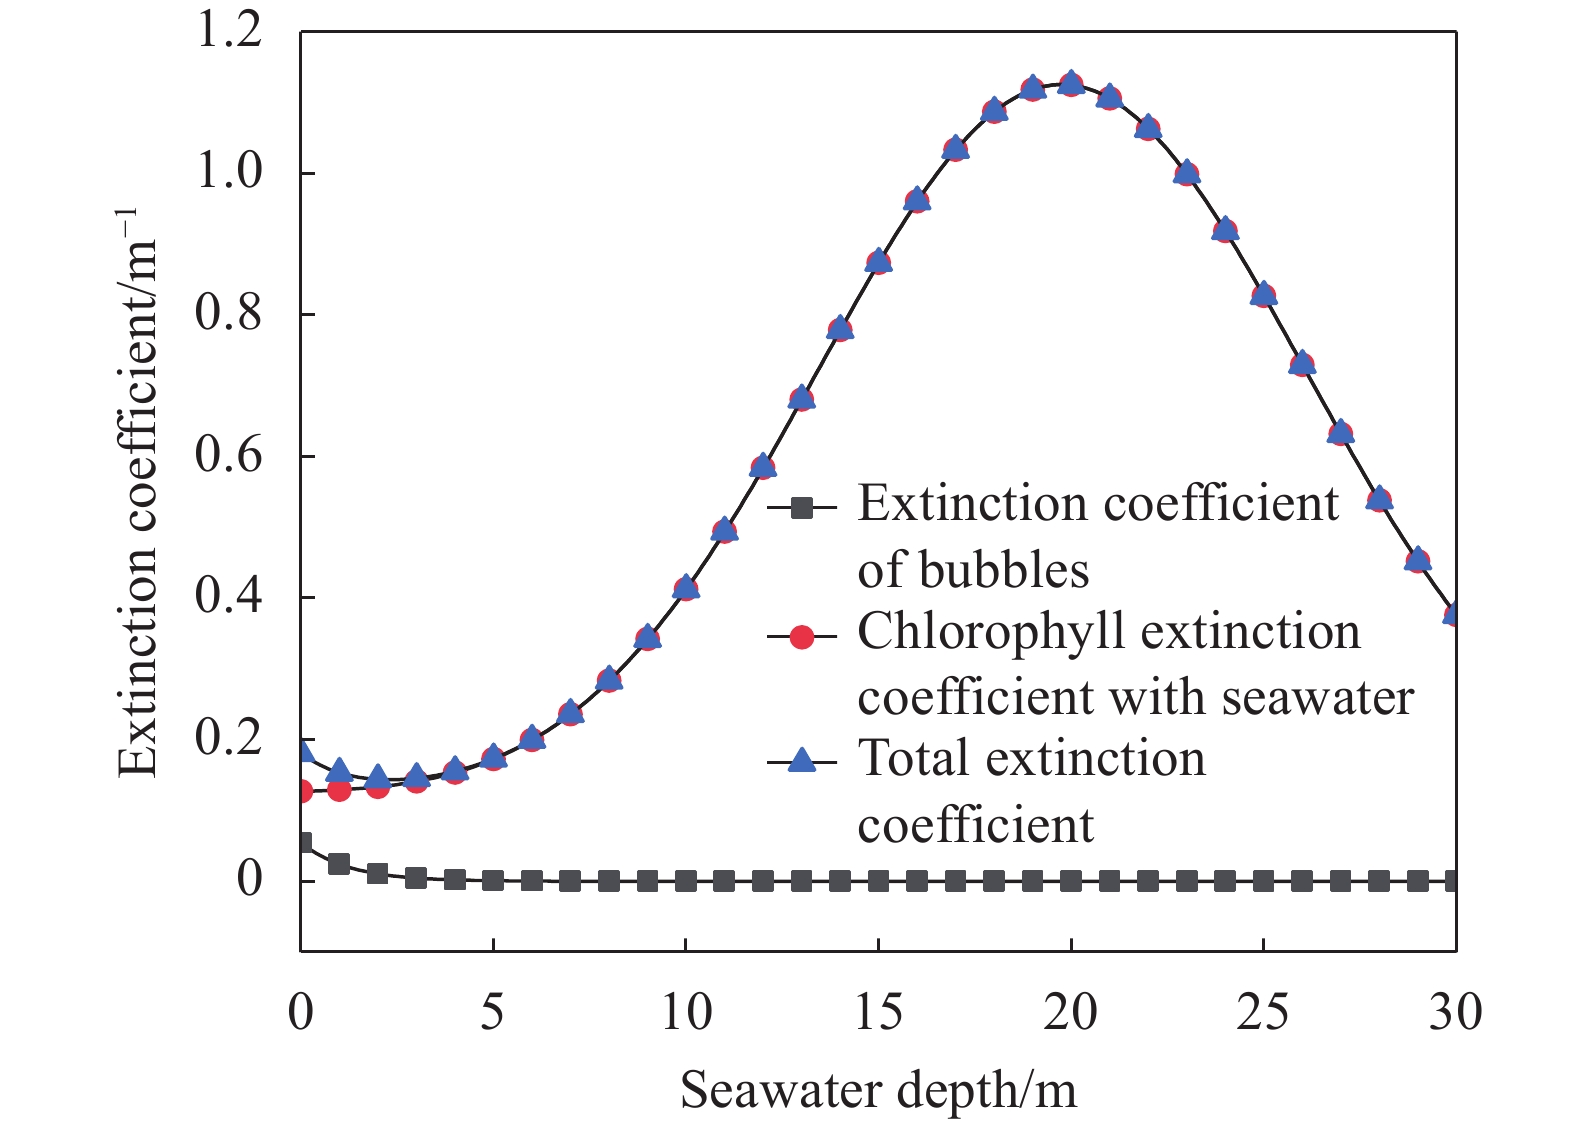 Variation of extinction coefficient of non-uniform seawater with depth of seawater